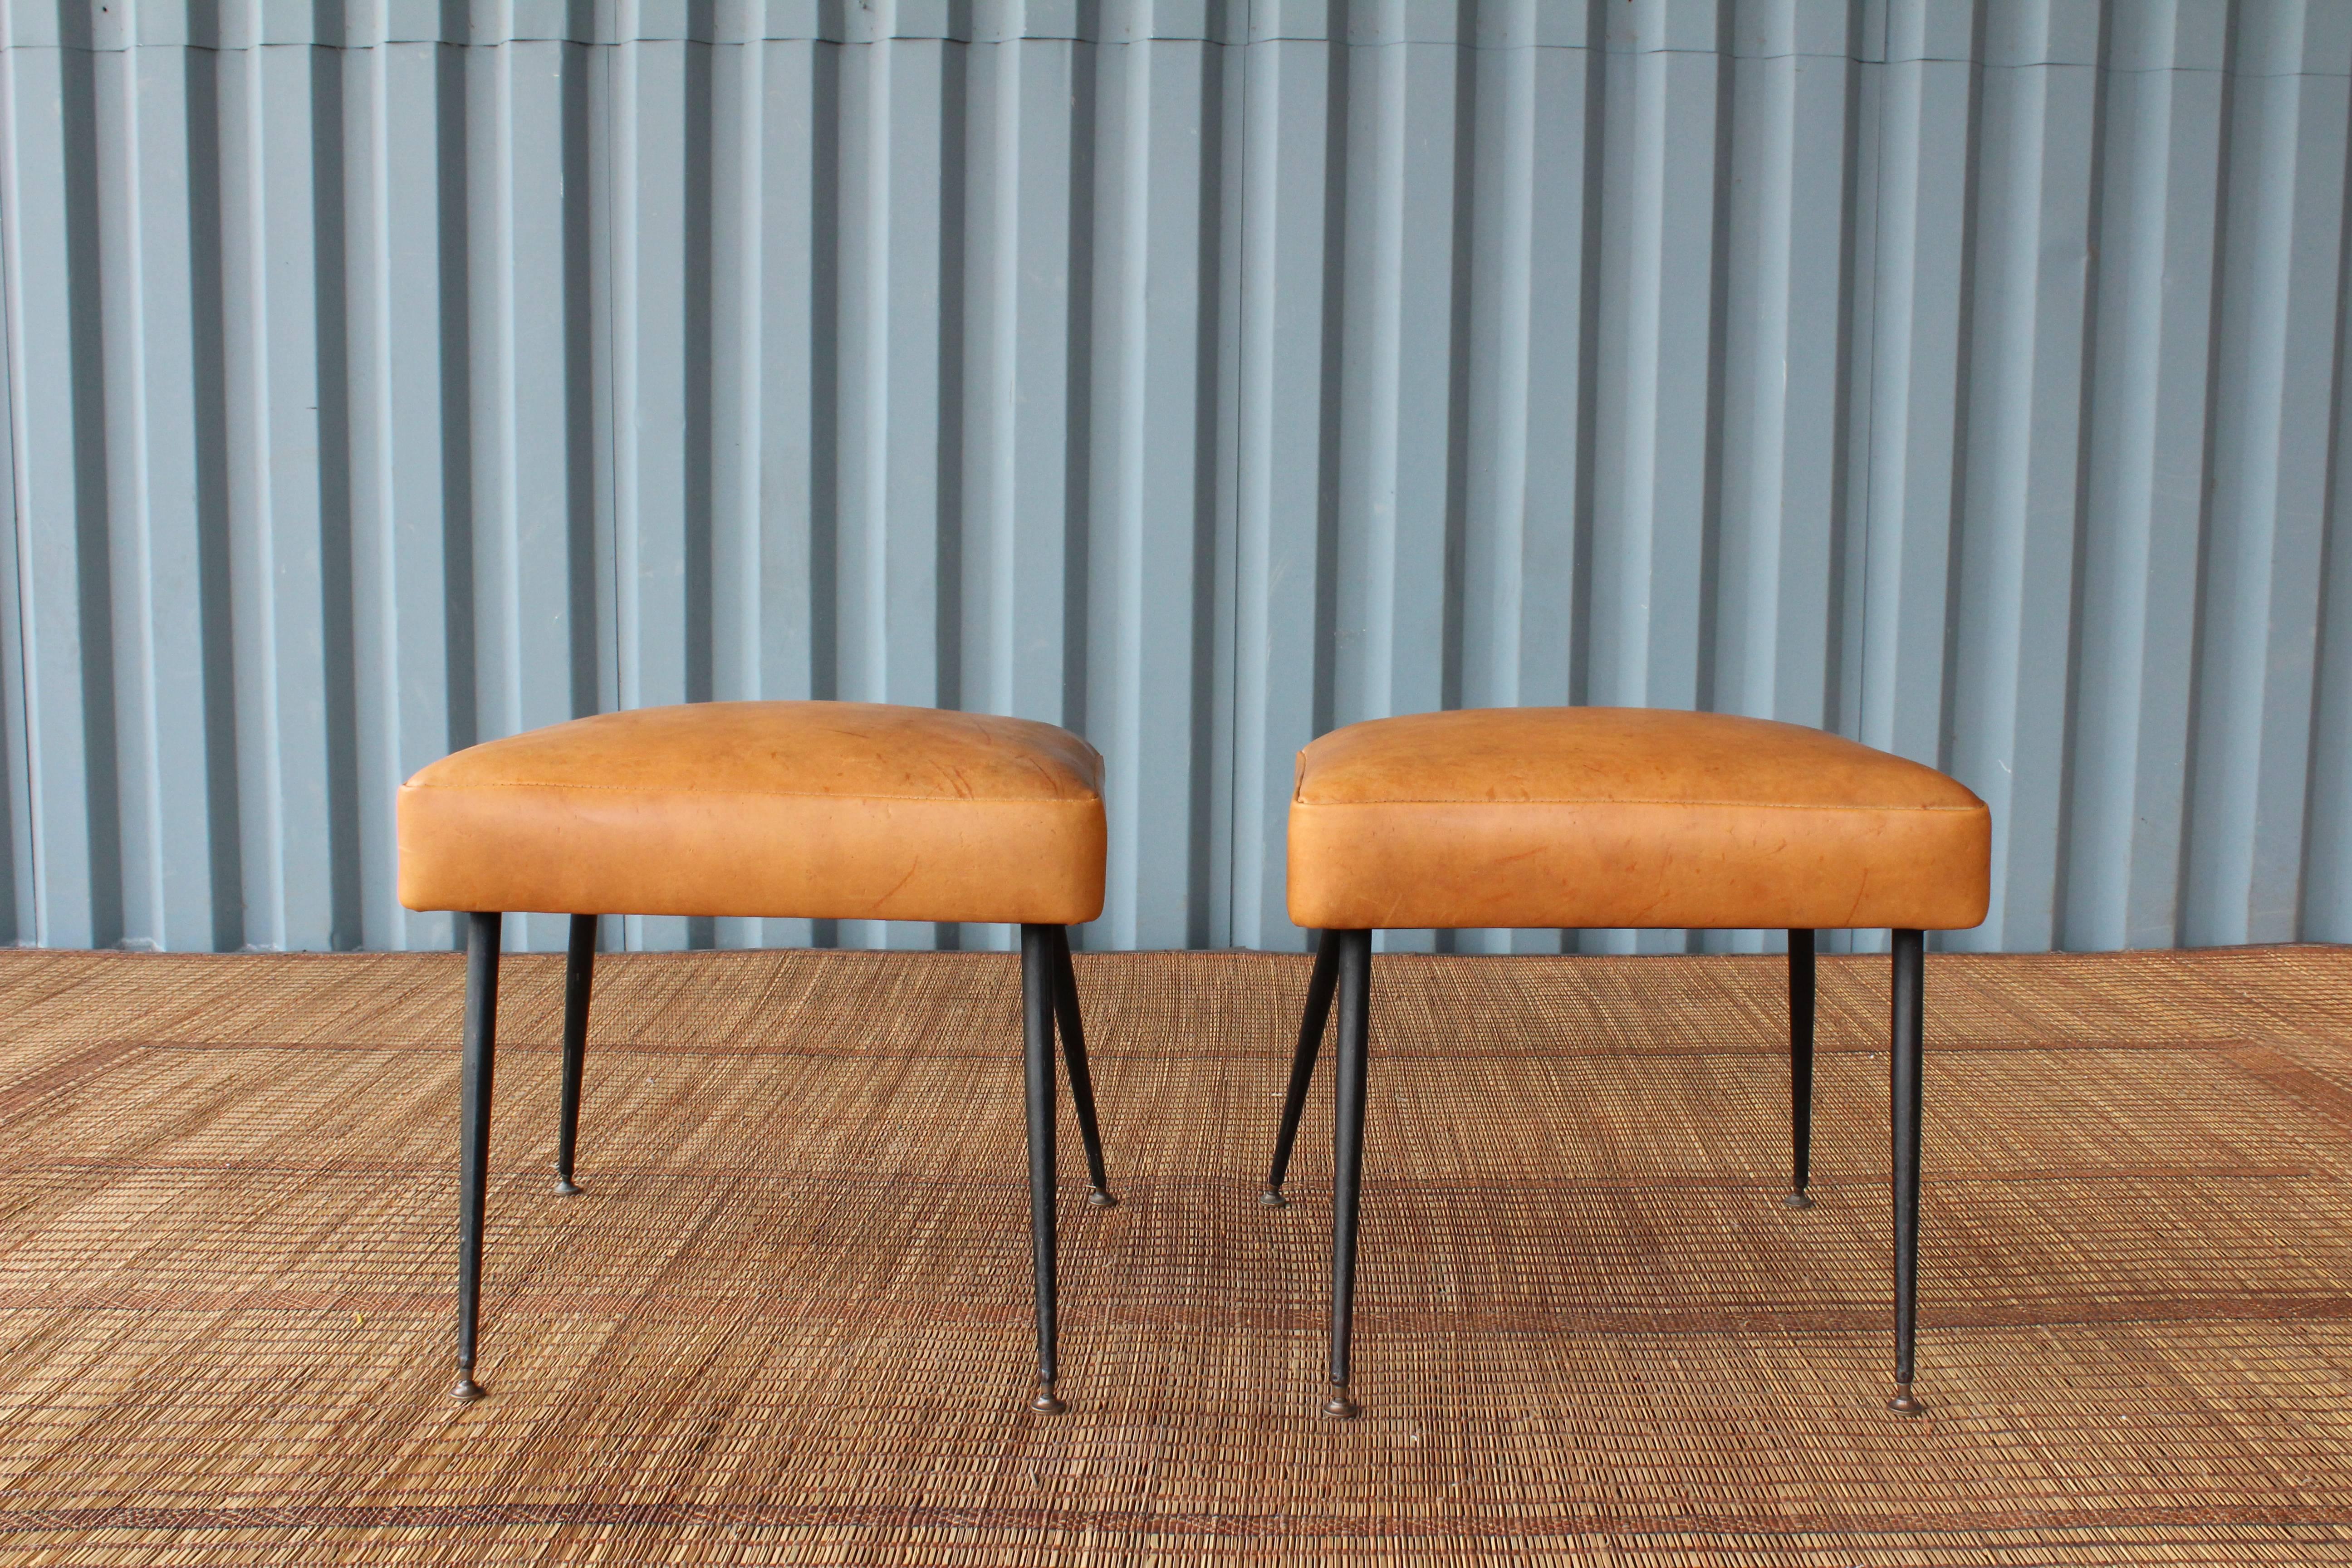 Sleek pair of 1950s Italian modern footstools. Steel legs with brass pivoting feet. Recently reupholstered in soft vintage leather hide.